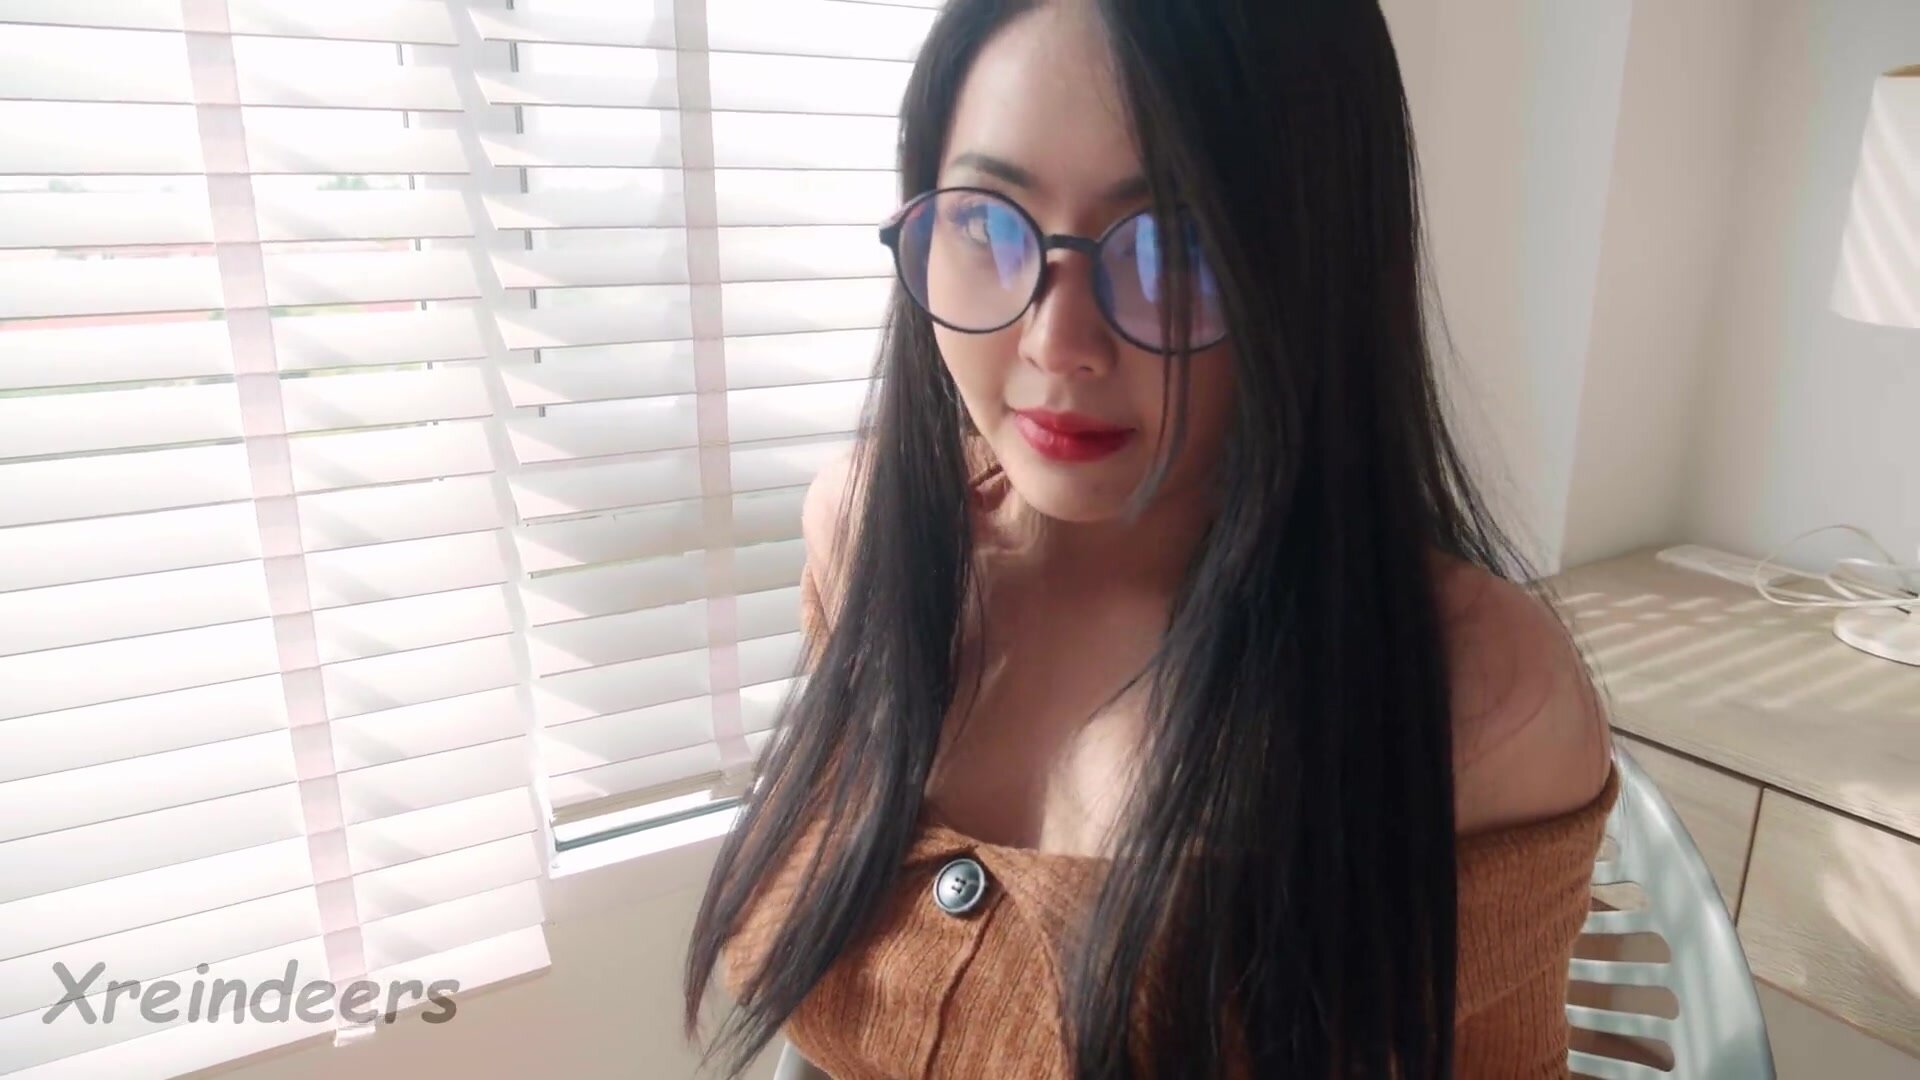 Xreindeers - A Nerdy Asian girl with Big Tits decides to ride a Cock until CREAMPIE